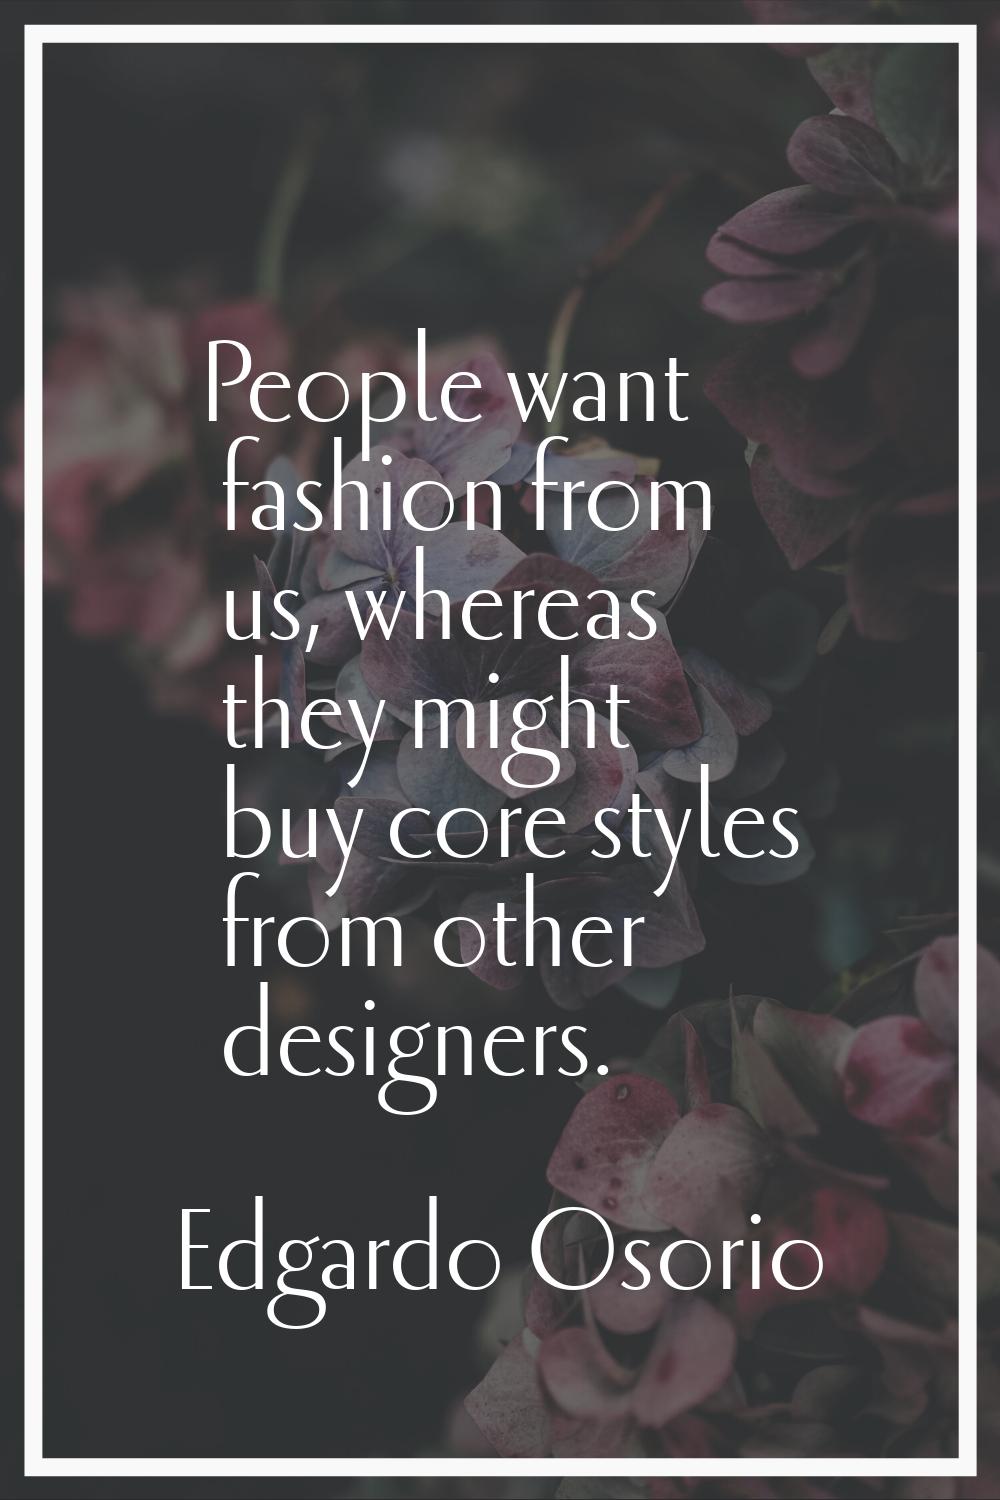 People want fashion from us, whereas they might buy core styles from other designers.